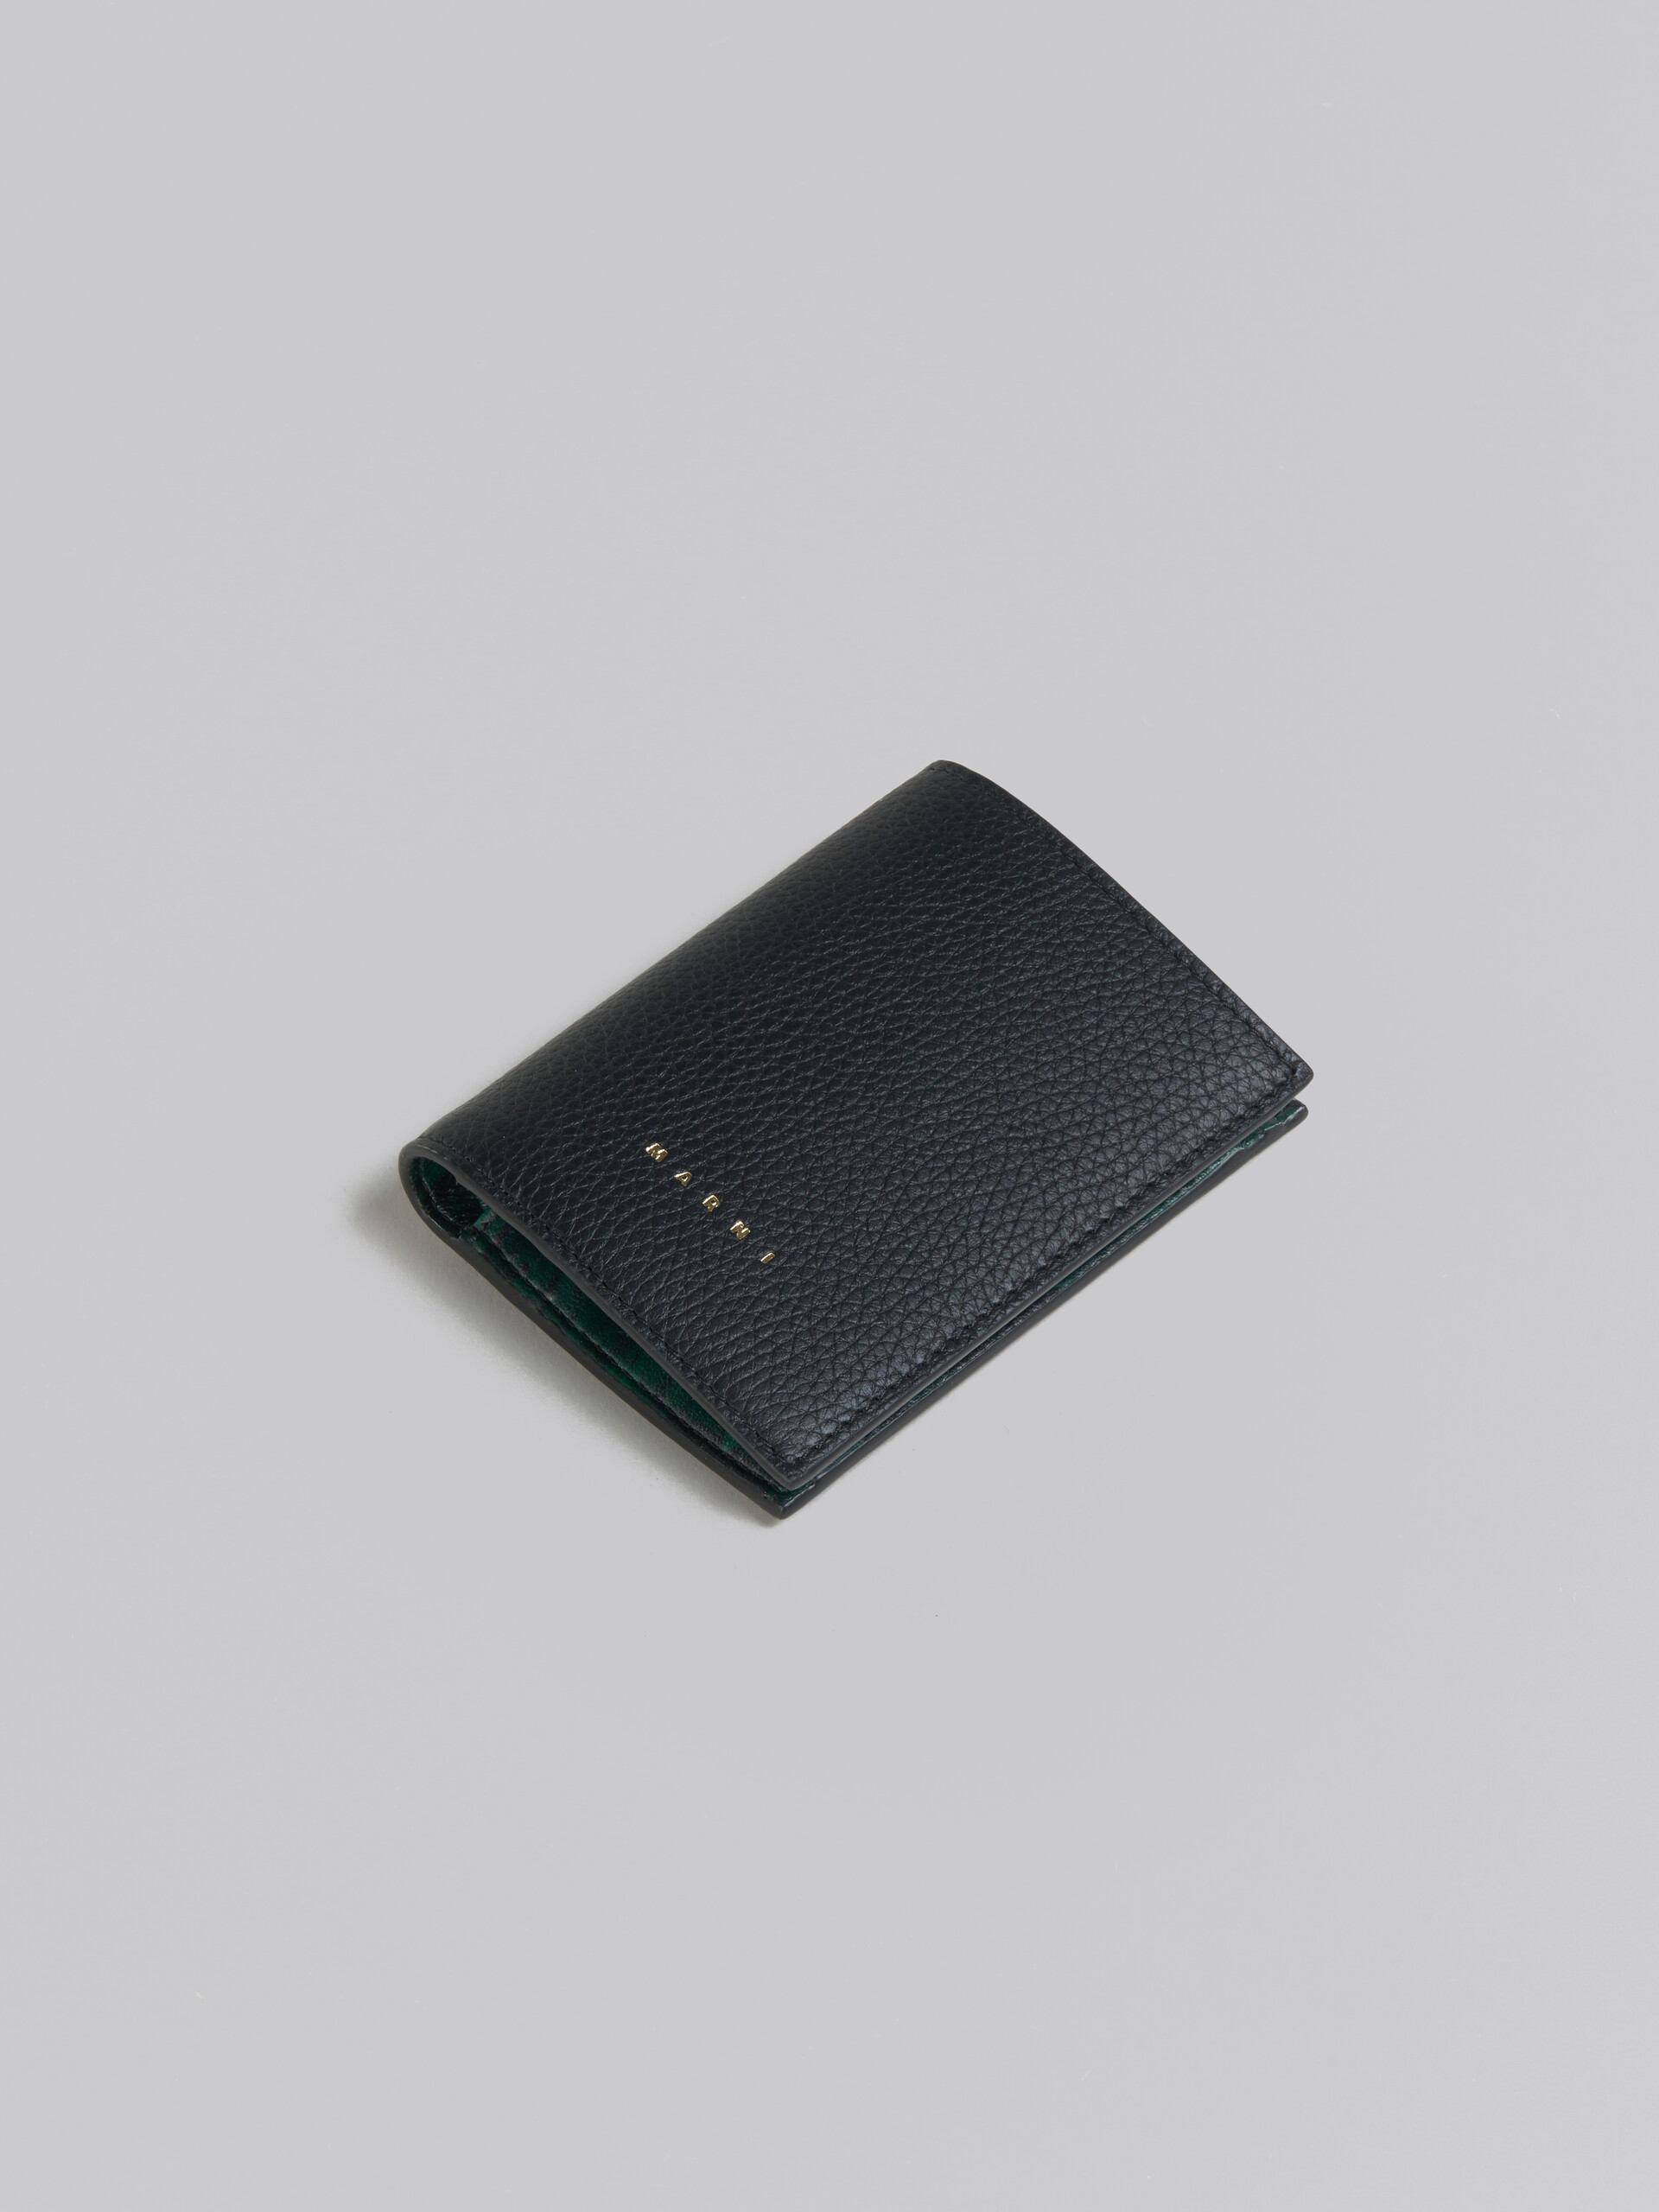 Black leather bifold Venice wallet with marbled interior - Wallets - Image 5